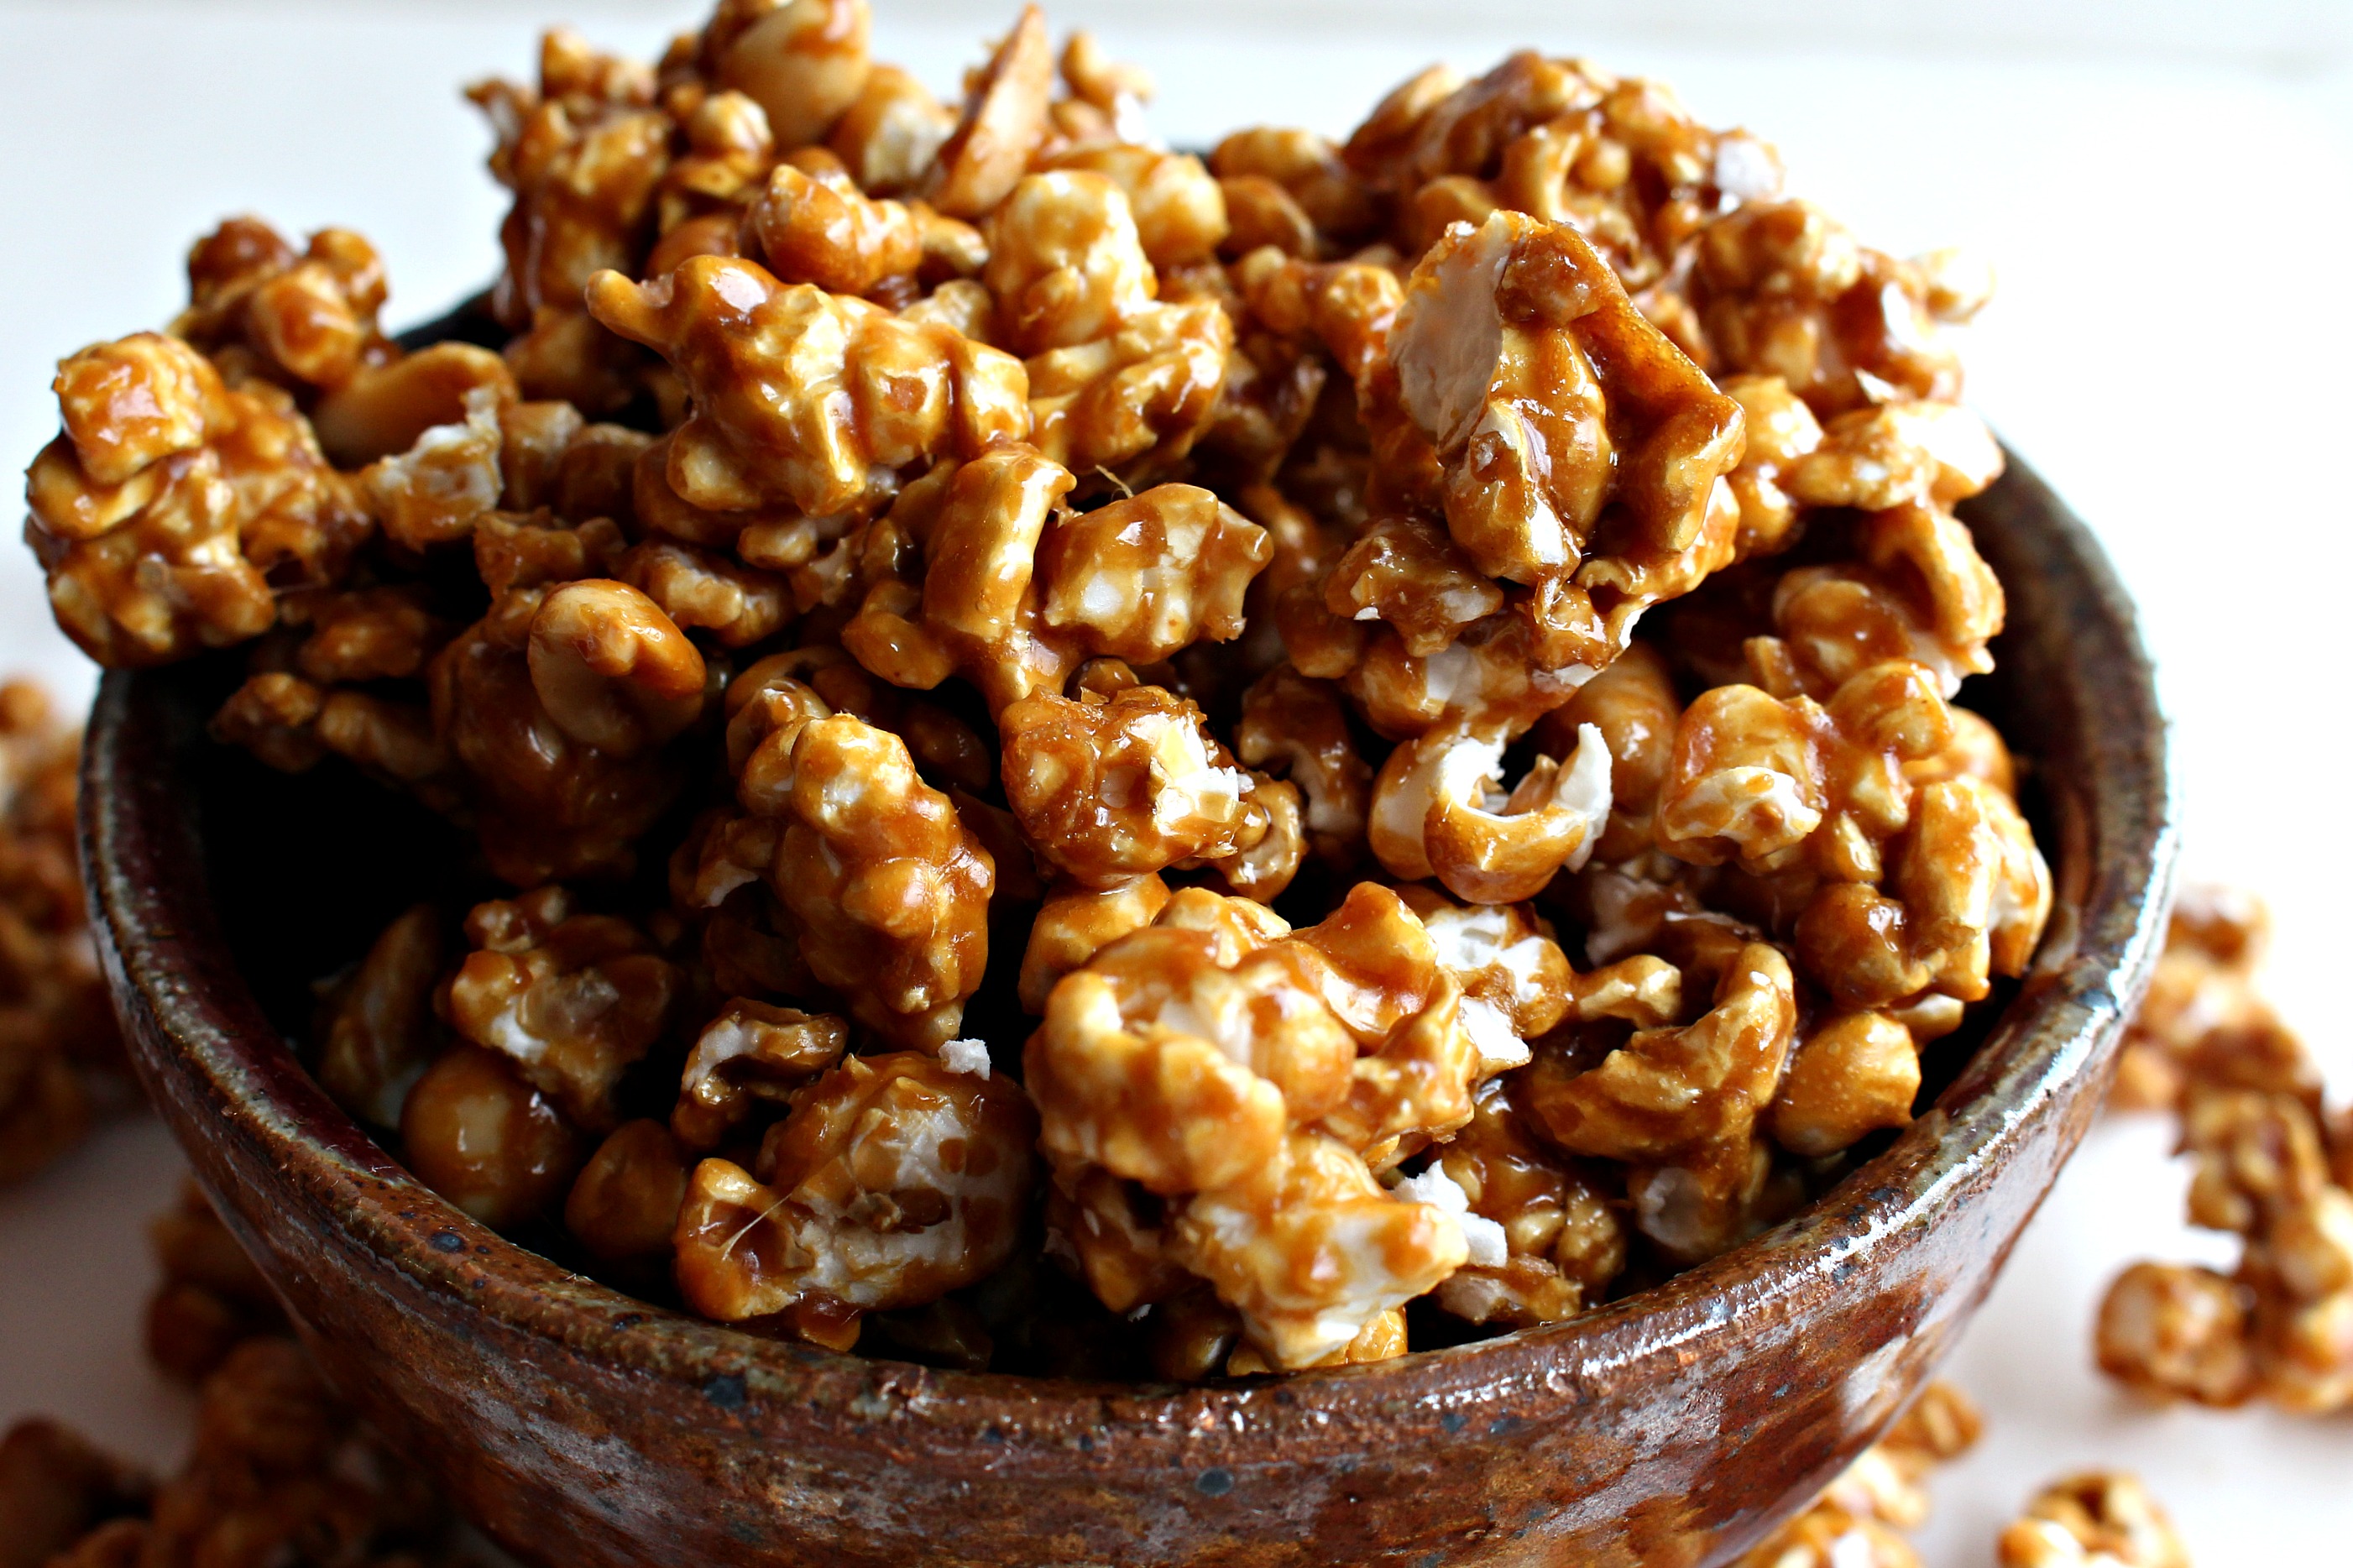 Homemade Caramel Popcorn with nuts